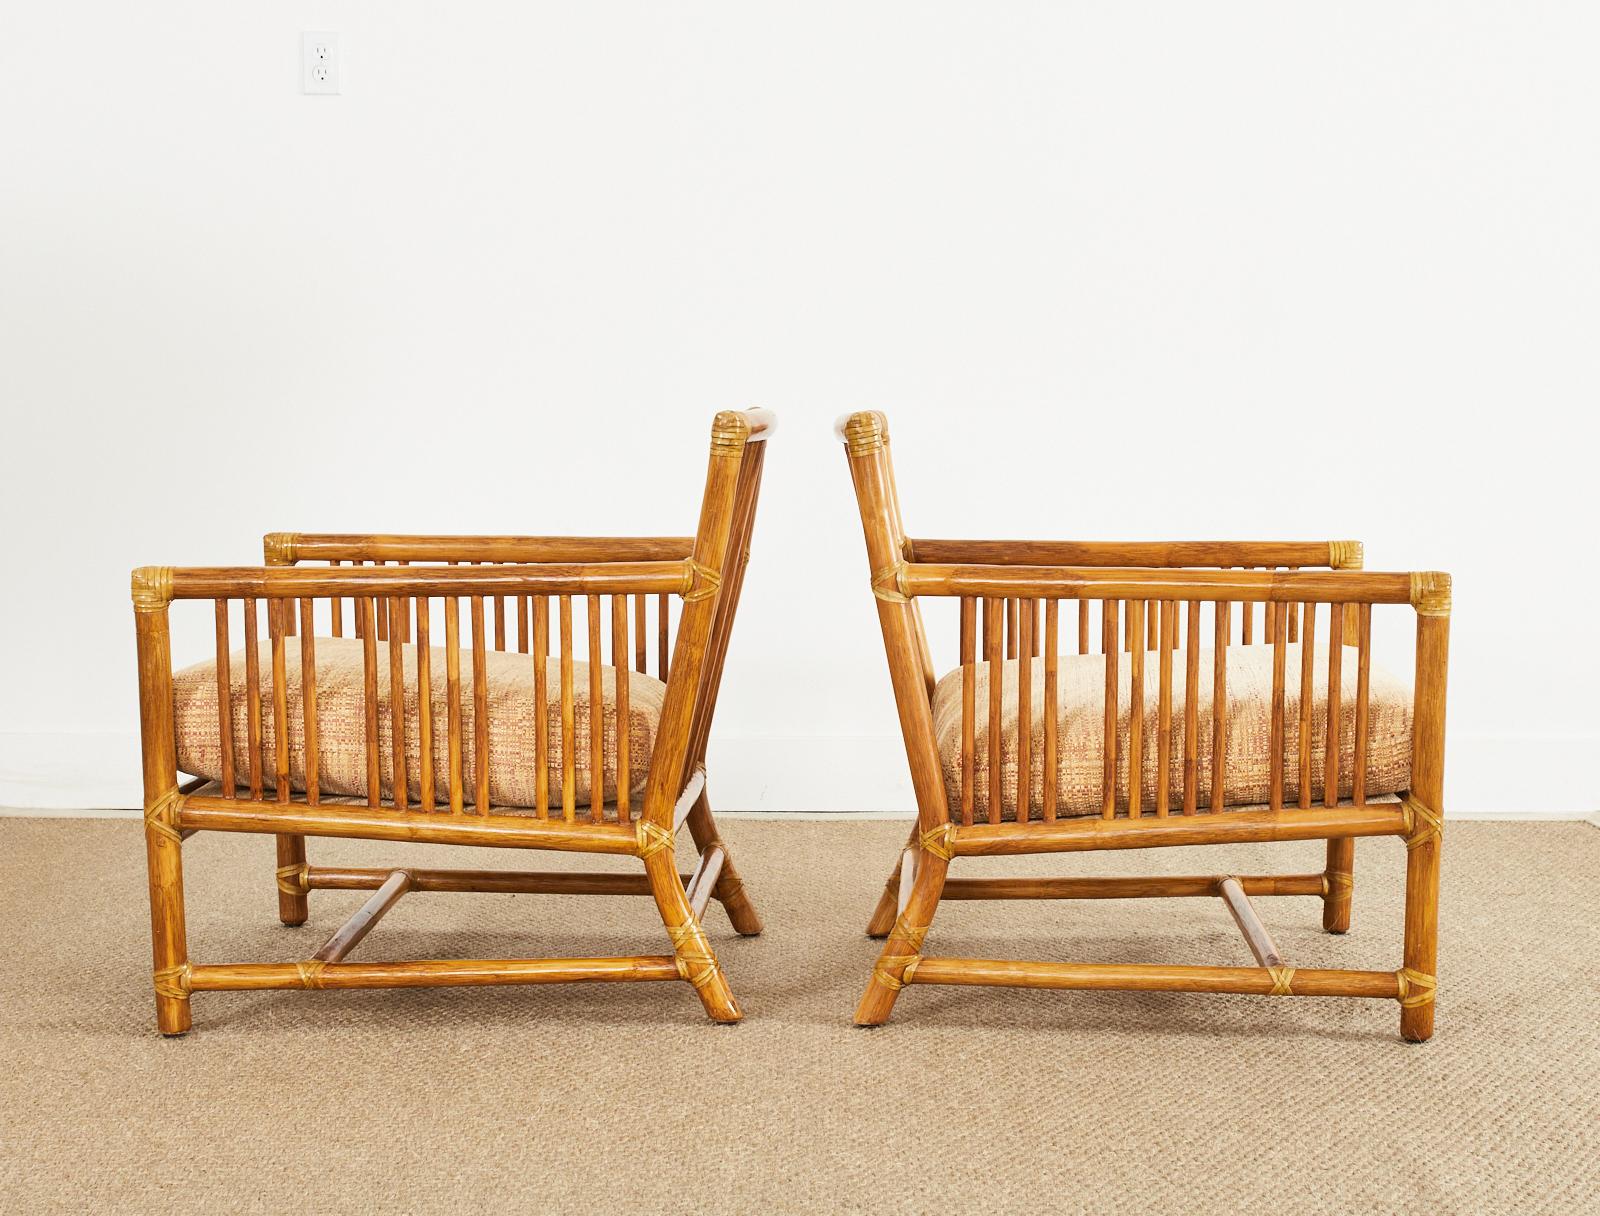 Pair of McGuire Organic Modern Rattan Pole Lounge Chairs In Good Condition For Sale In Rio Vista, CA